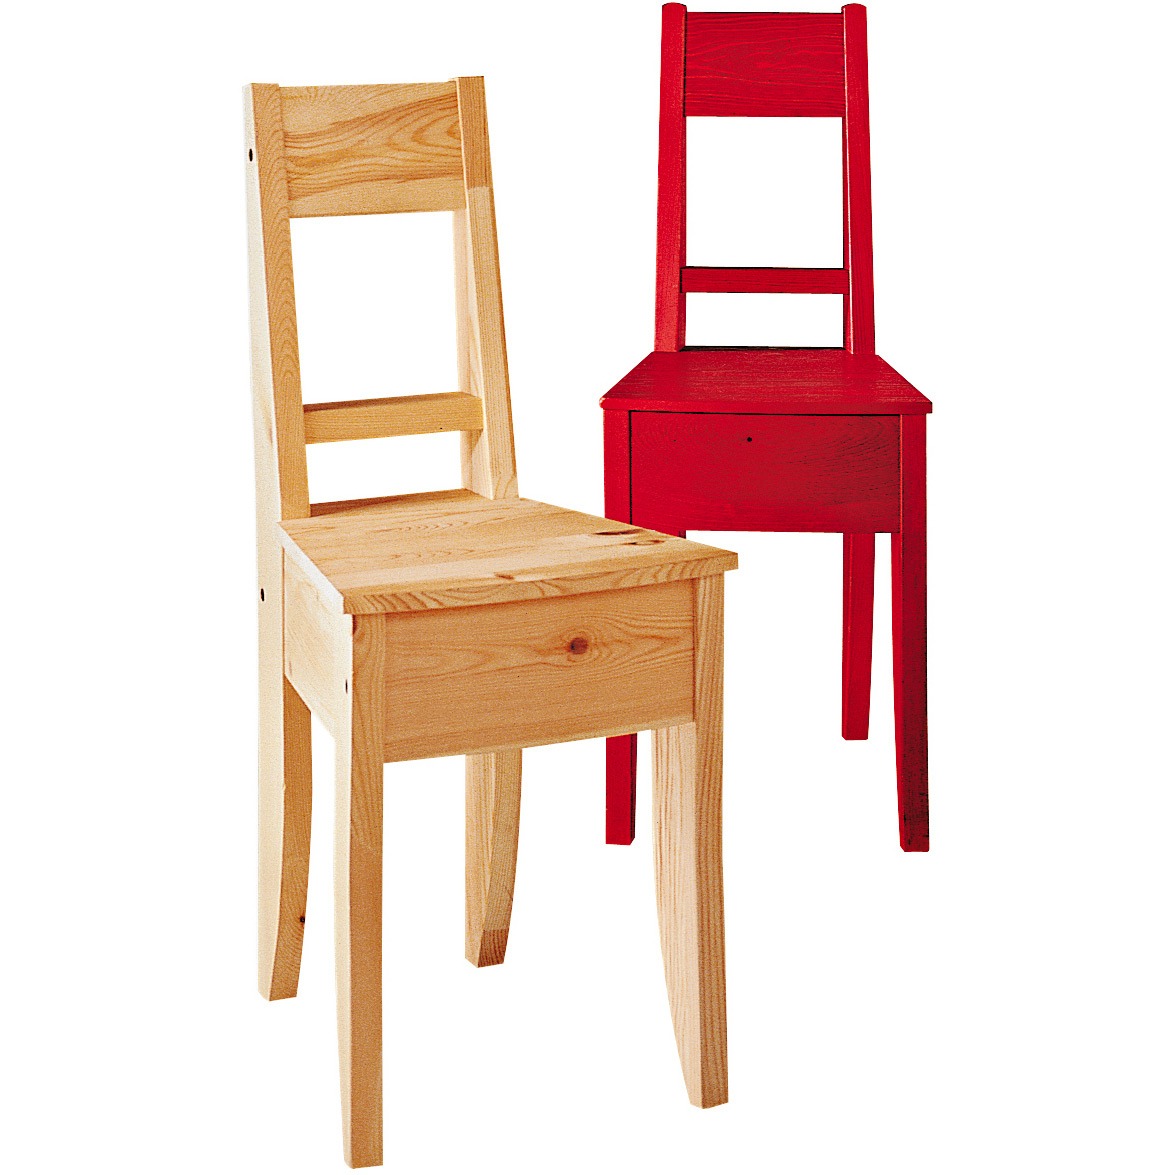 Two wooden chairs, one untreated pine, one painted bright red, EMIL.